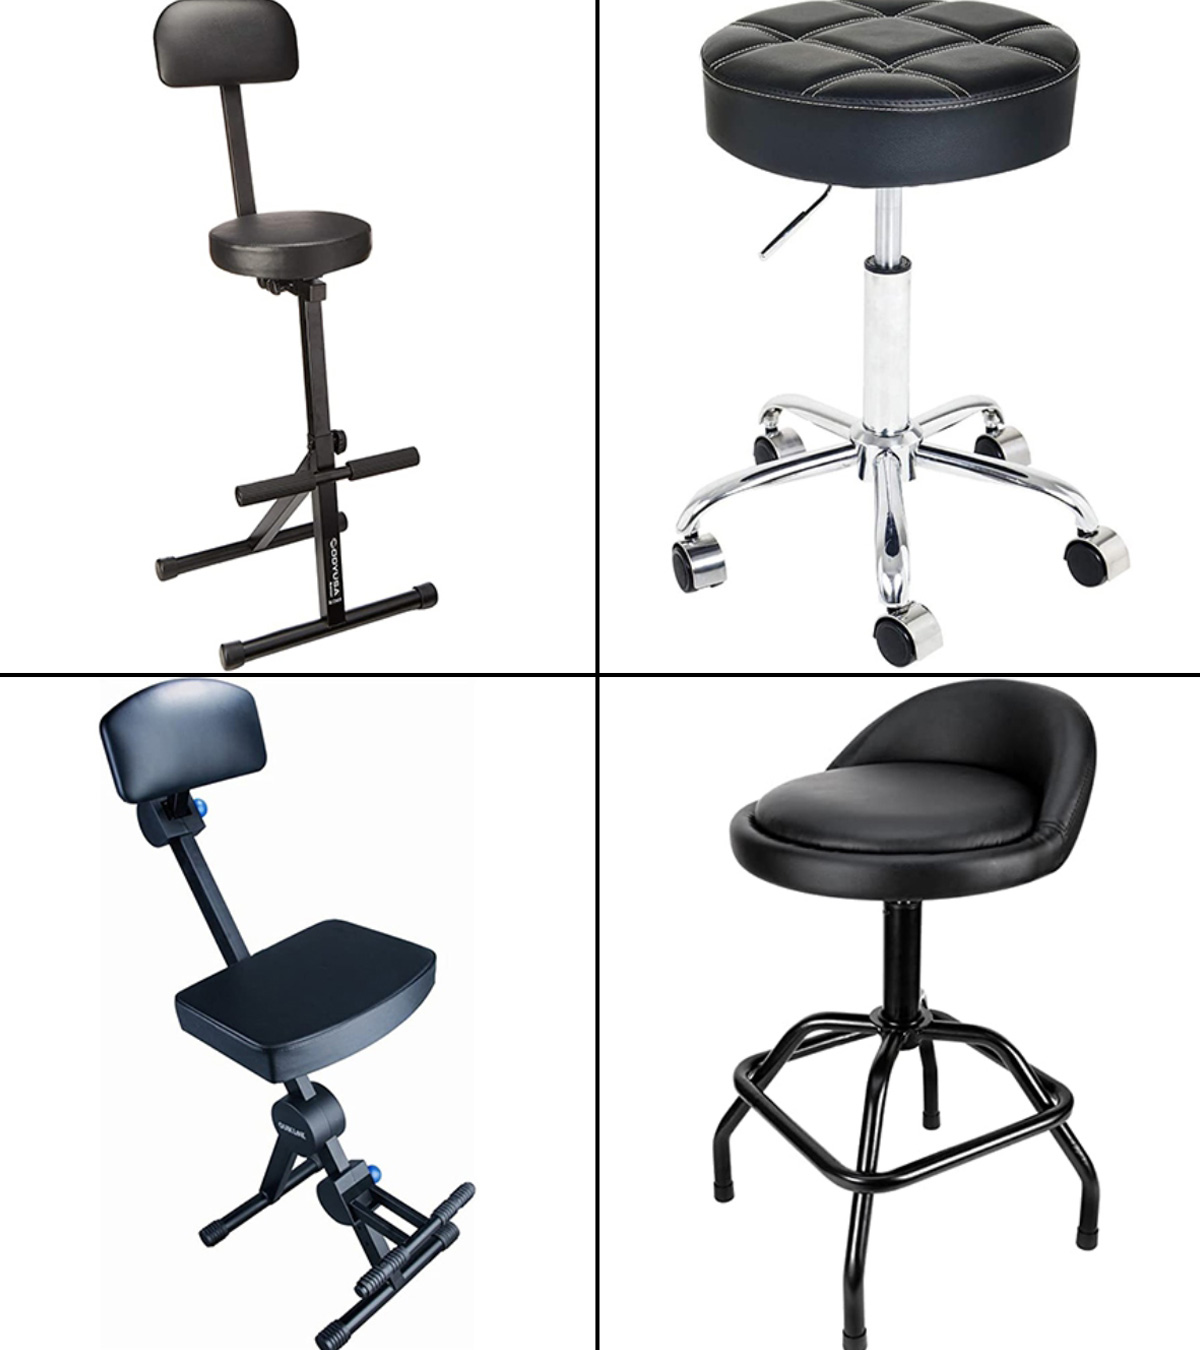 11 Best Guitar Chairs And Stools In 2021